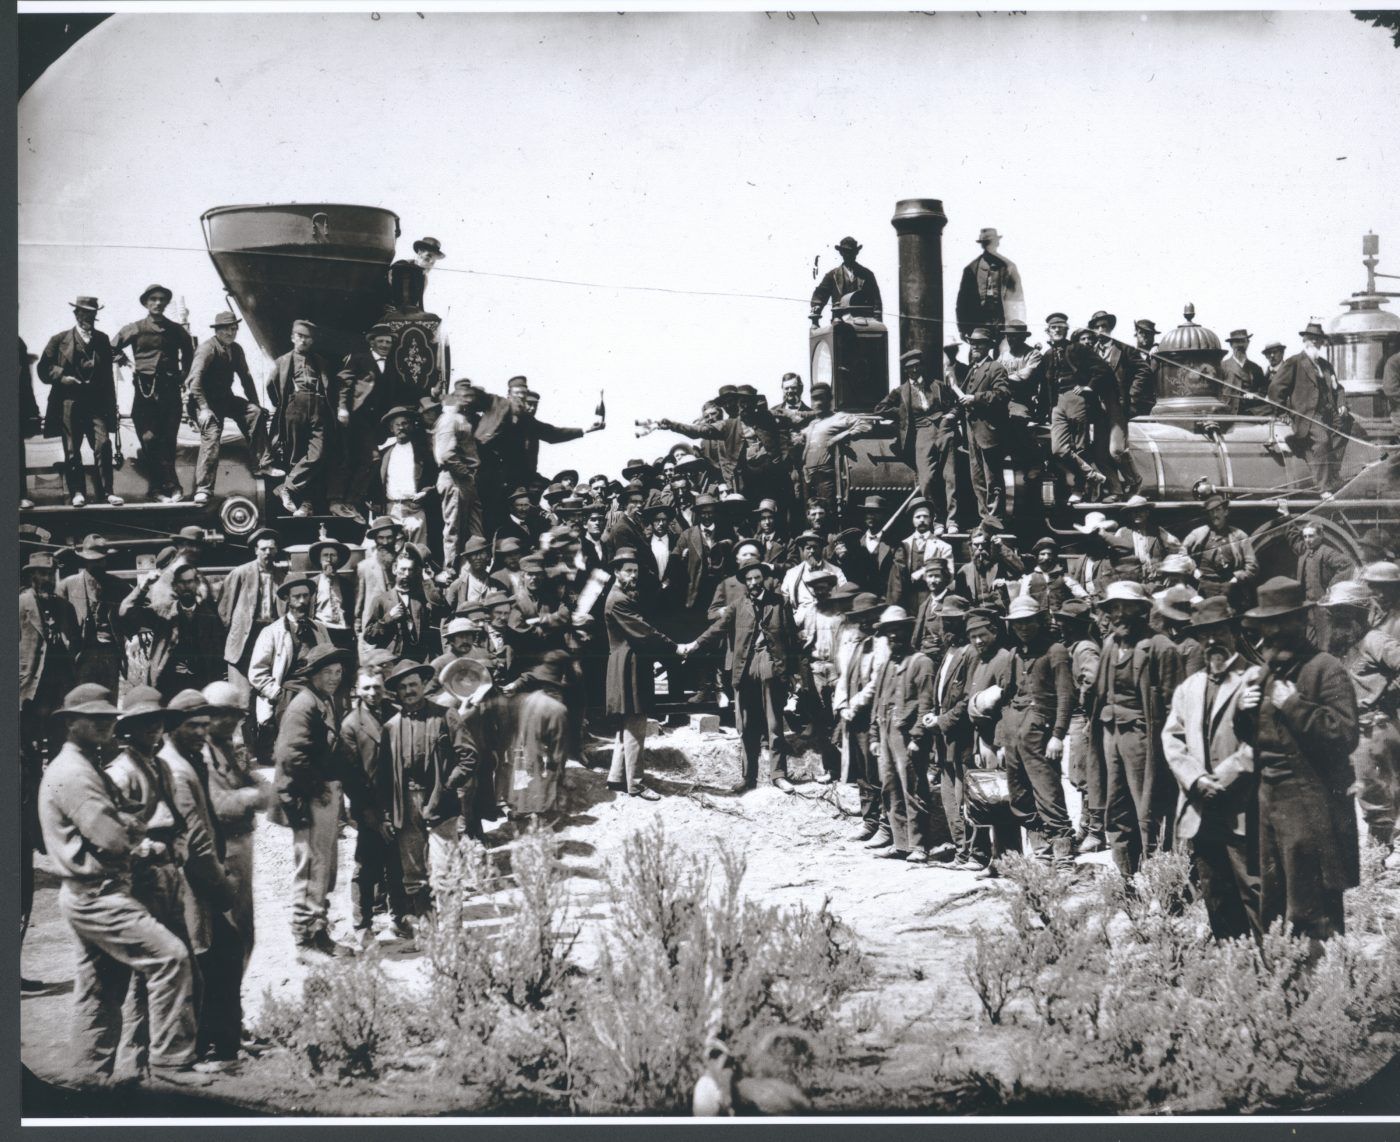 10 May 2019 Posted.
“East and West Shaking hands at laying Last Rail” by Andrew J. Russell on May 10, 1869 at Promontory Summit, Utah, displayed at the Museum of Chinese in America (MOCA) core exhibition, Courtesy of the Union Pacific Railroad Museum.
摄影师Andrew J. Russell拍摄的“东西两段铁路的胜利会师”，1869年5月10日，犹他州海角峰，美国华人博物馆（MOCA）核心展览展出图片，联合太平洋铁路博物馆馆藏